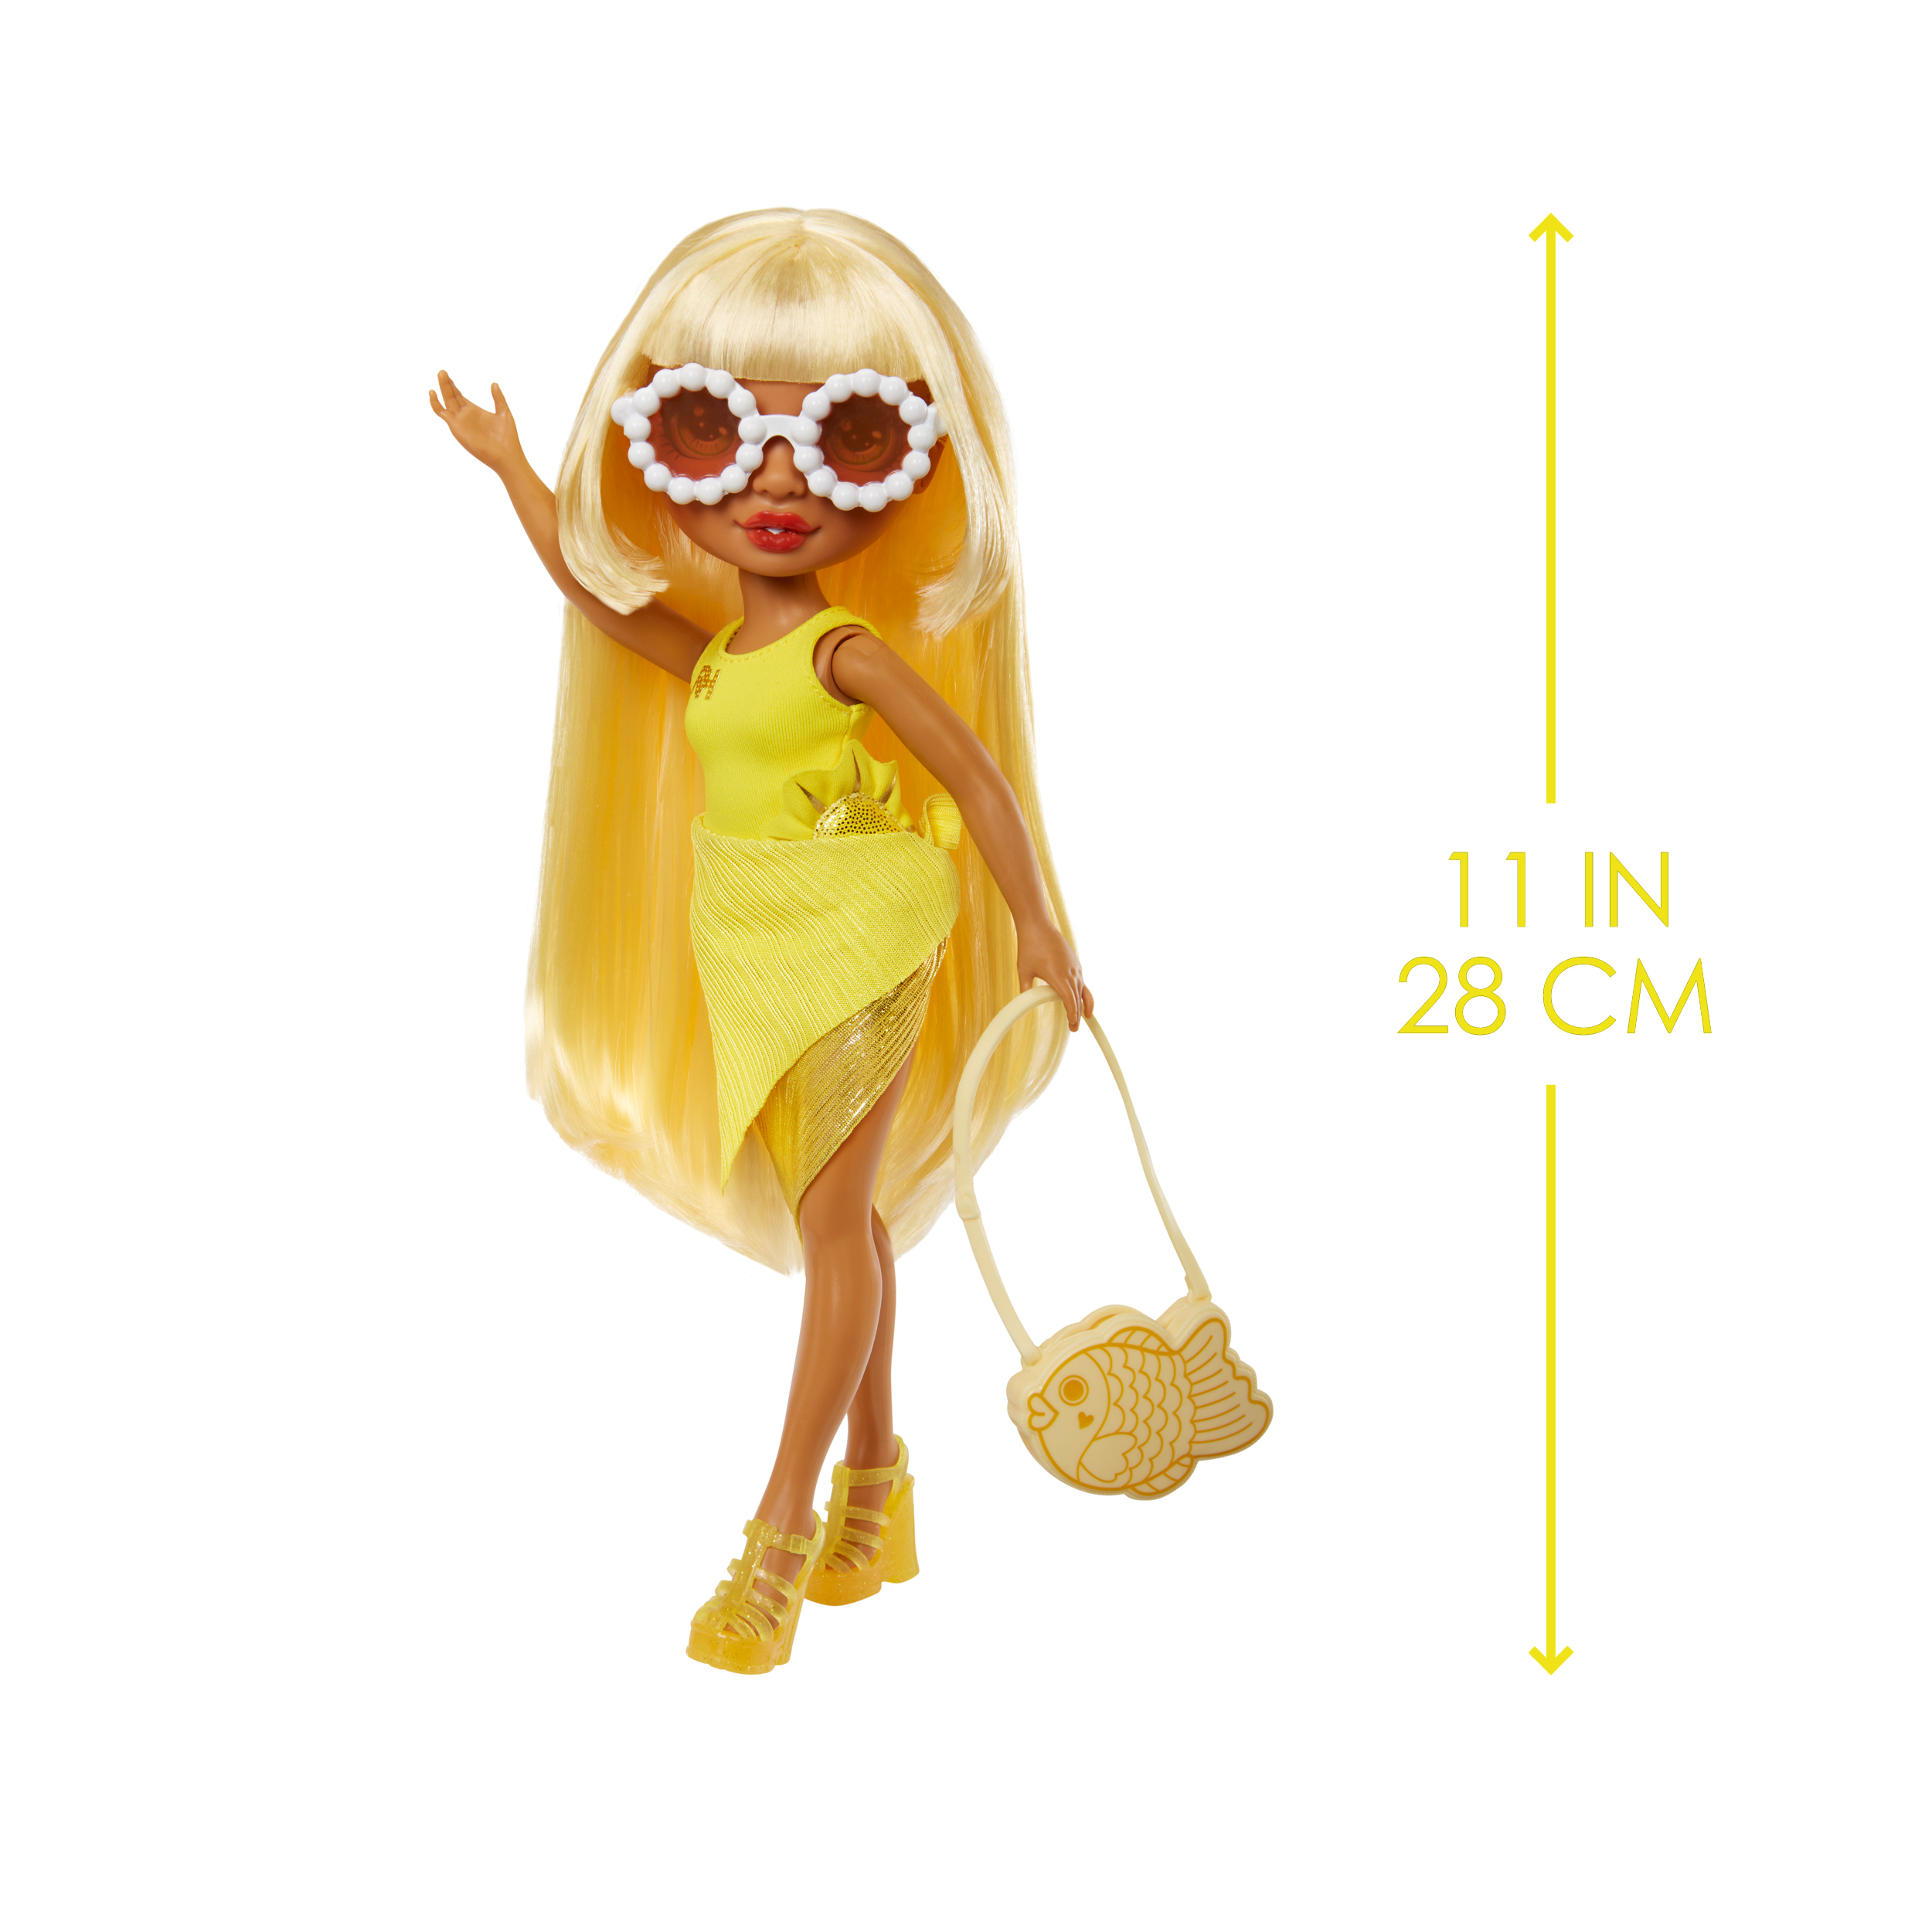 Rainbow High Swim & Style Sunny, Yellow 11? Doll, Removable Swimsuit, Wrap, Sandals, Fun Play Accessories. Kids Toy Gift Ages 4-12 - image 4 of 8